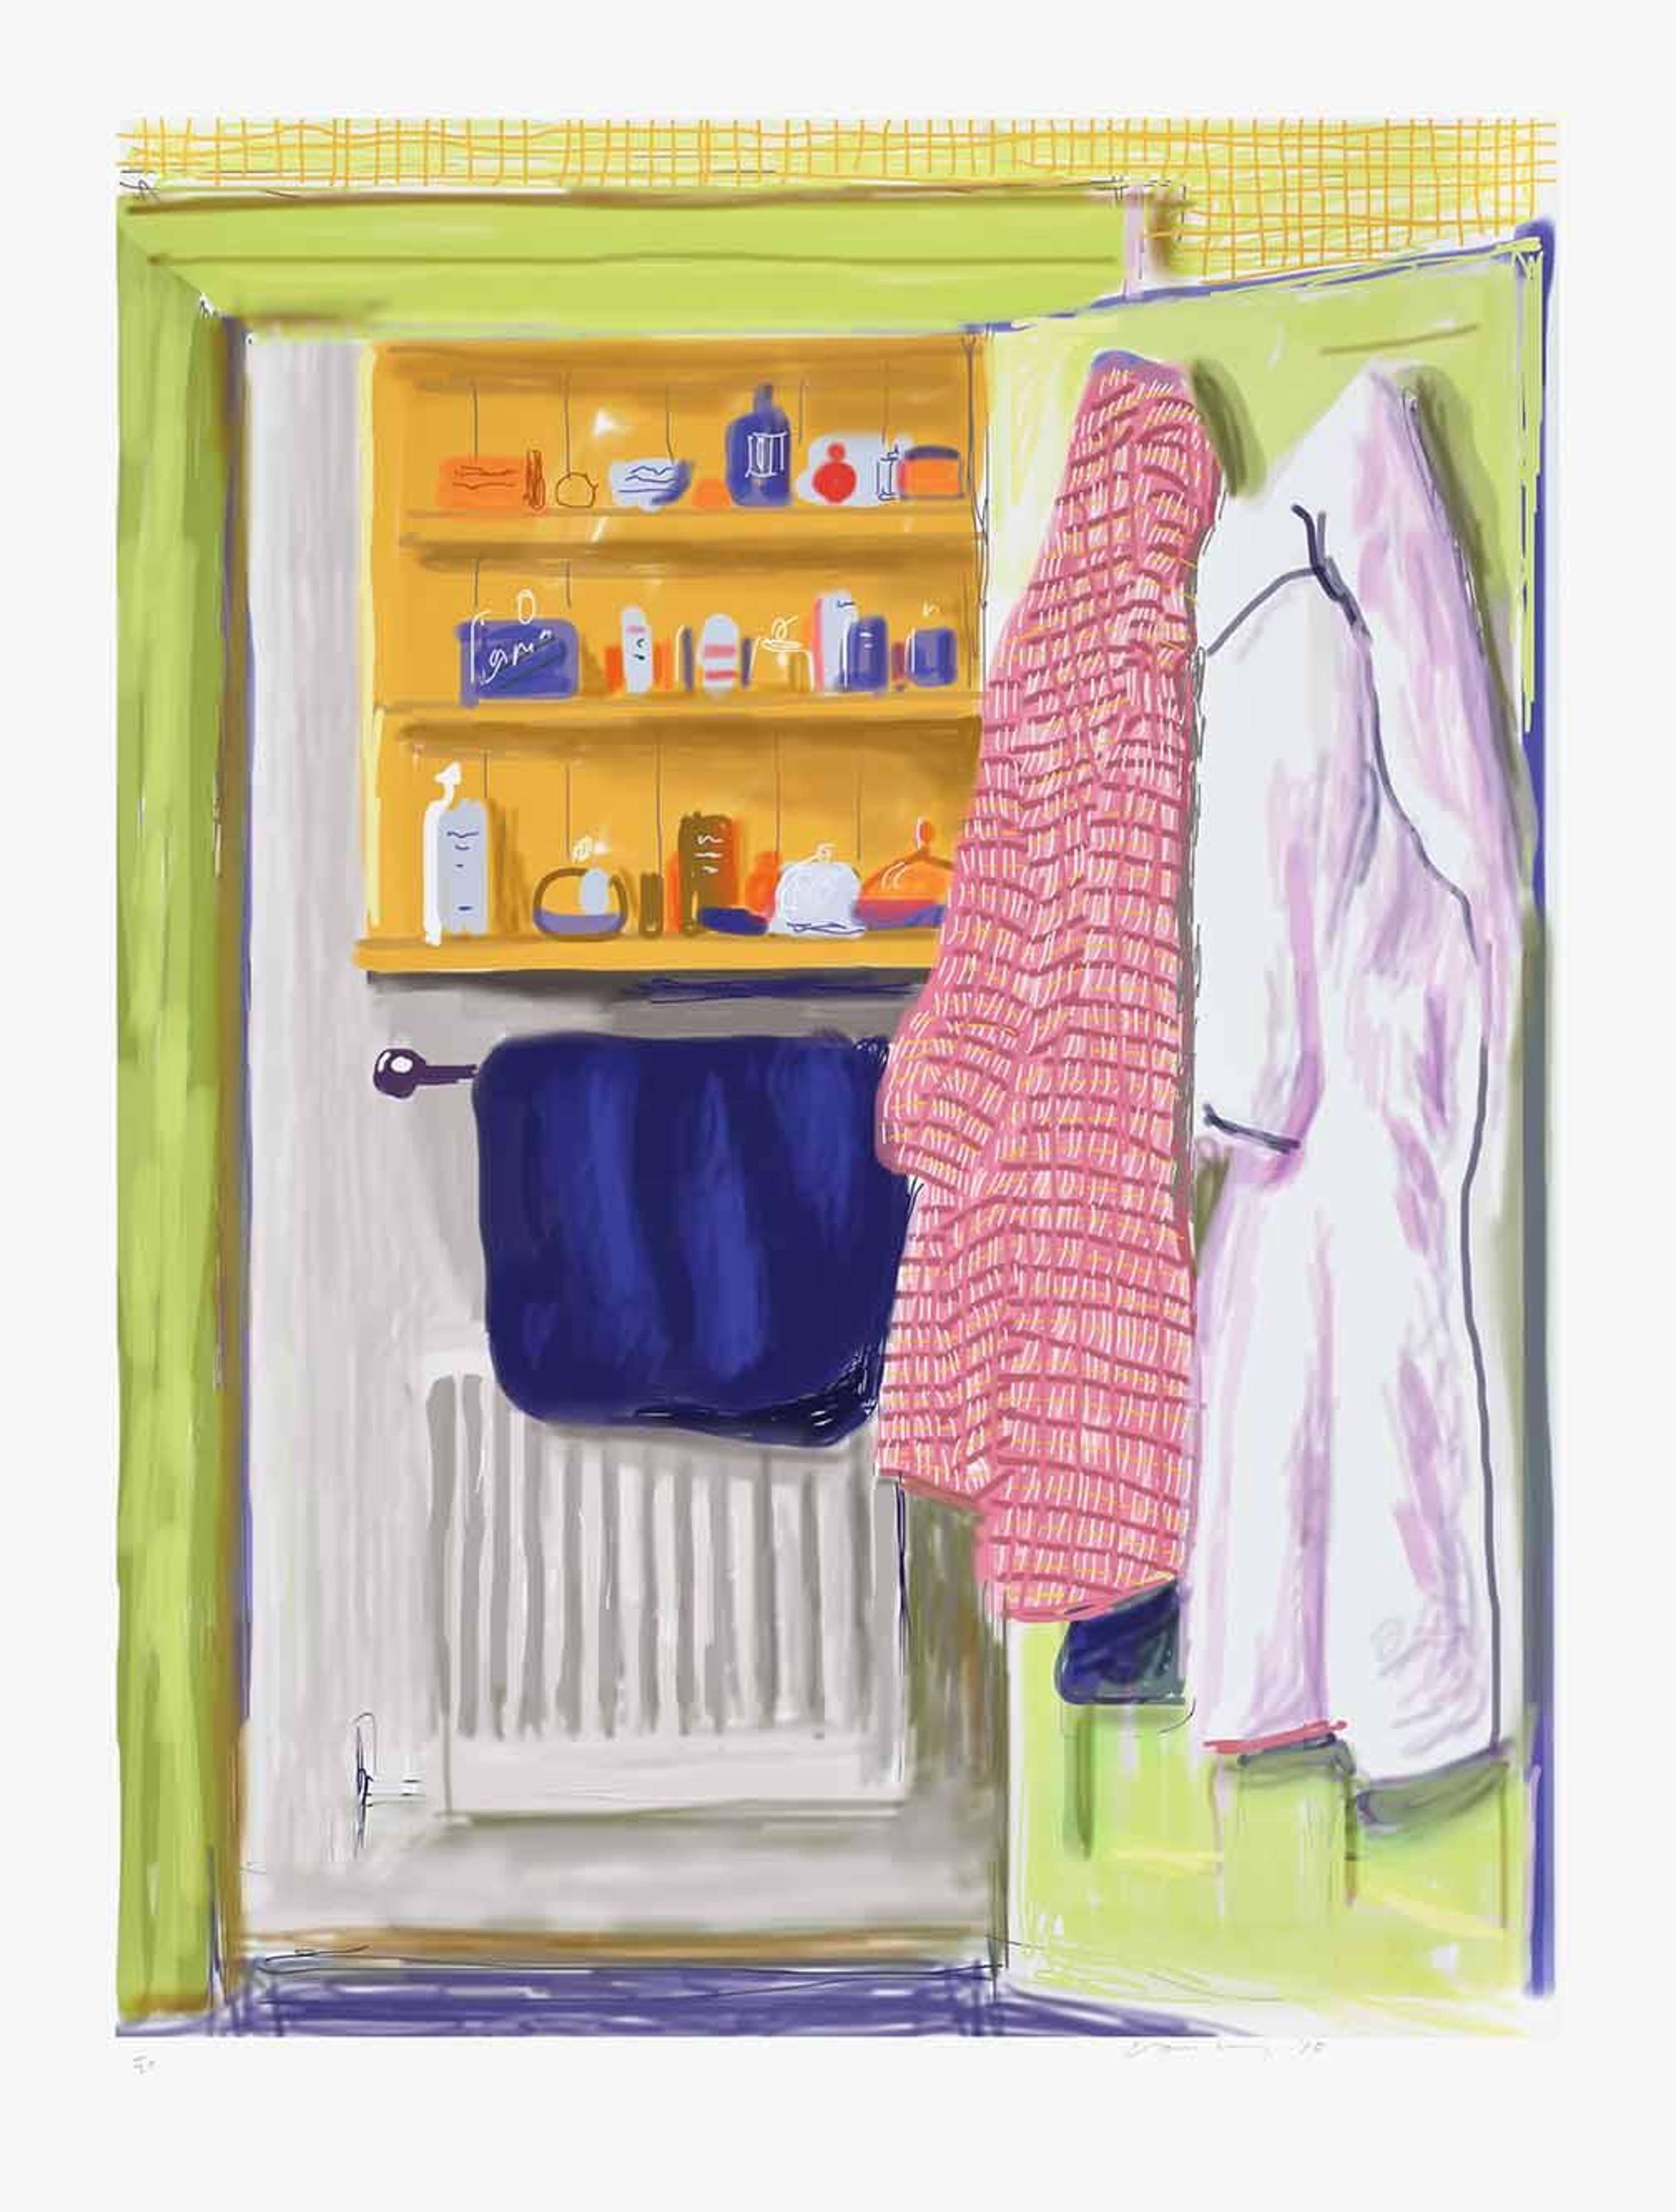 David Hockney’s Untitled No.557. A digital print of an interior bathroom setting with an exposed medicine cabinet, and red and white bath robes against a green door.